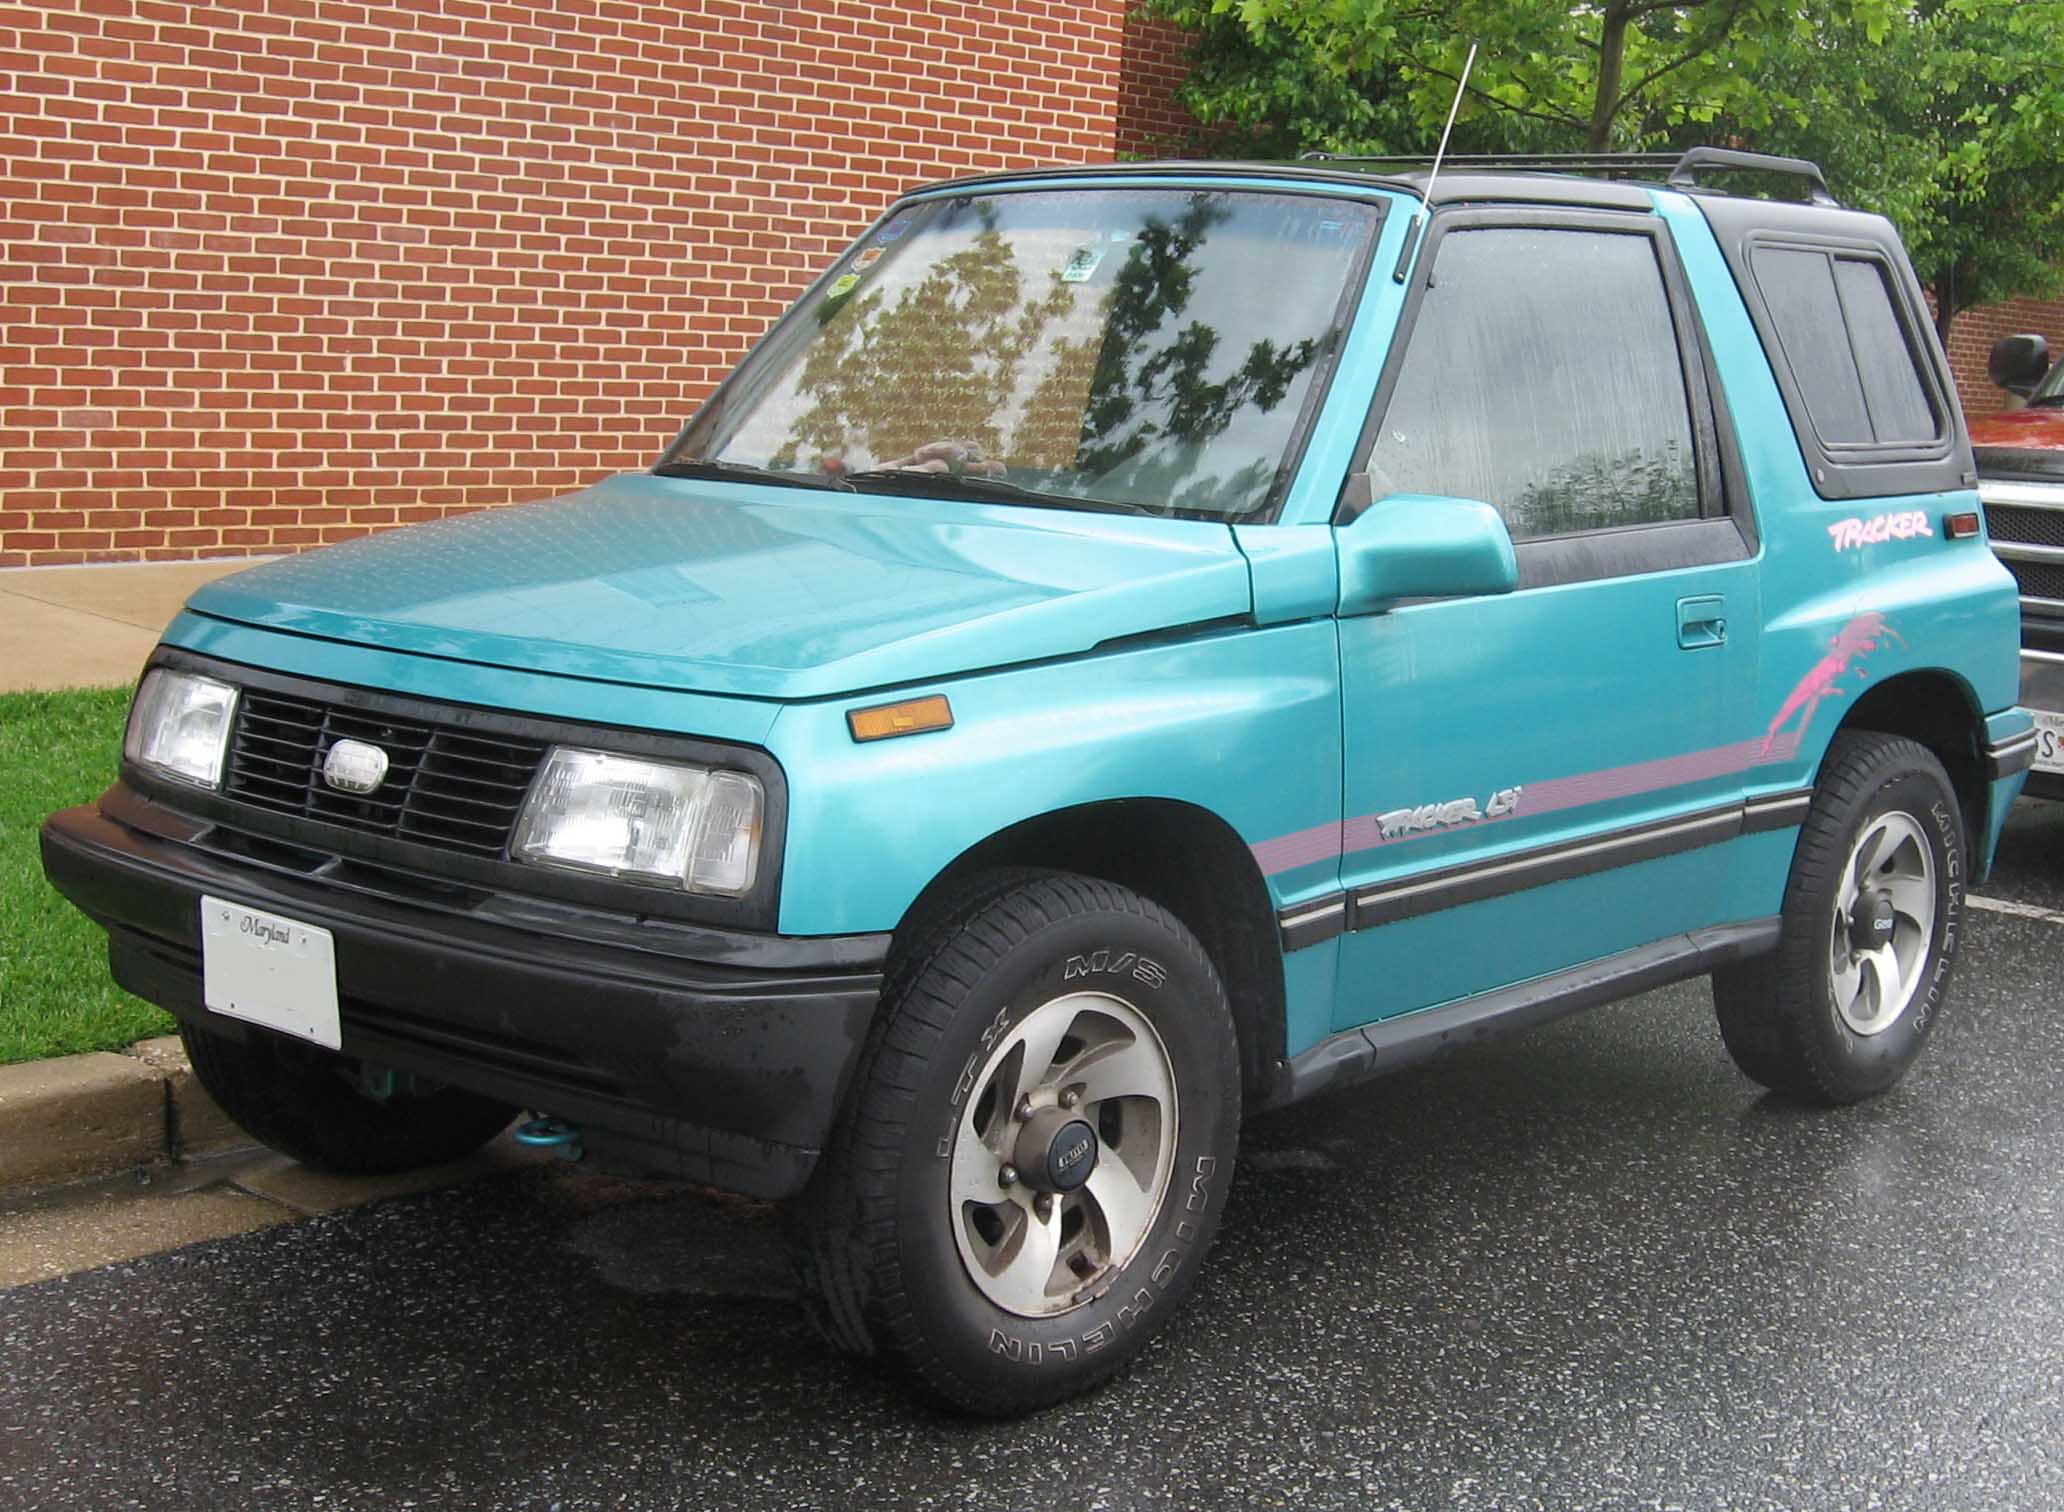 Image result for 1998 geo tracker